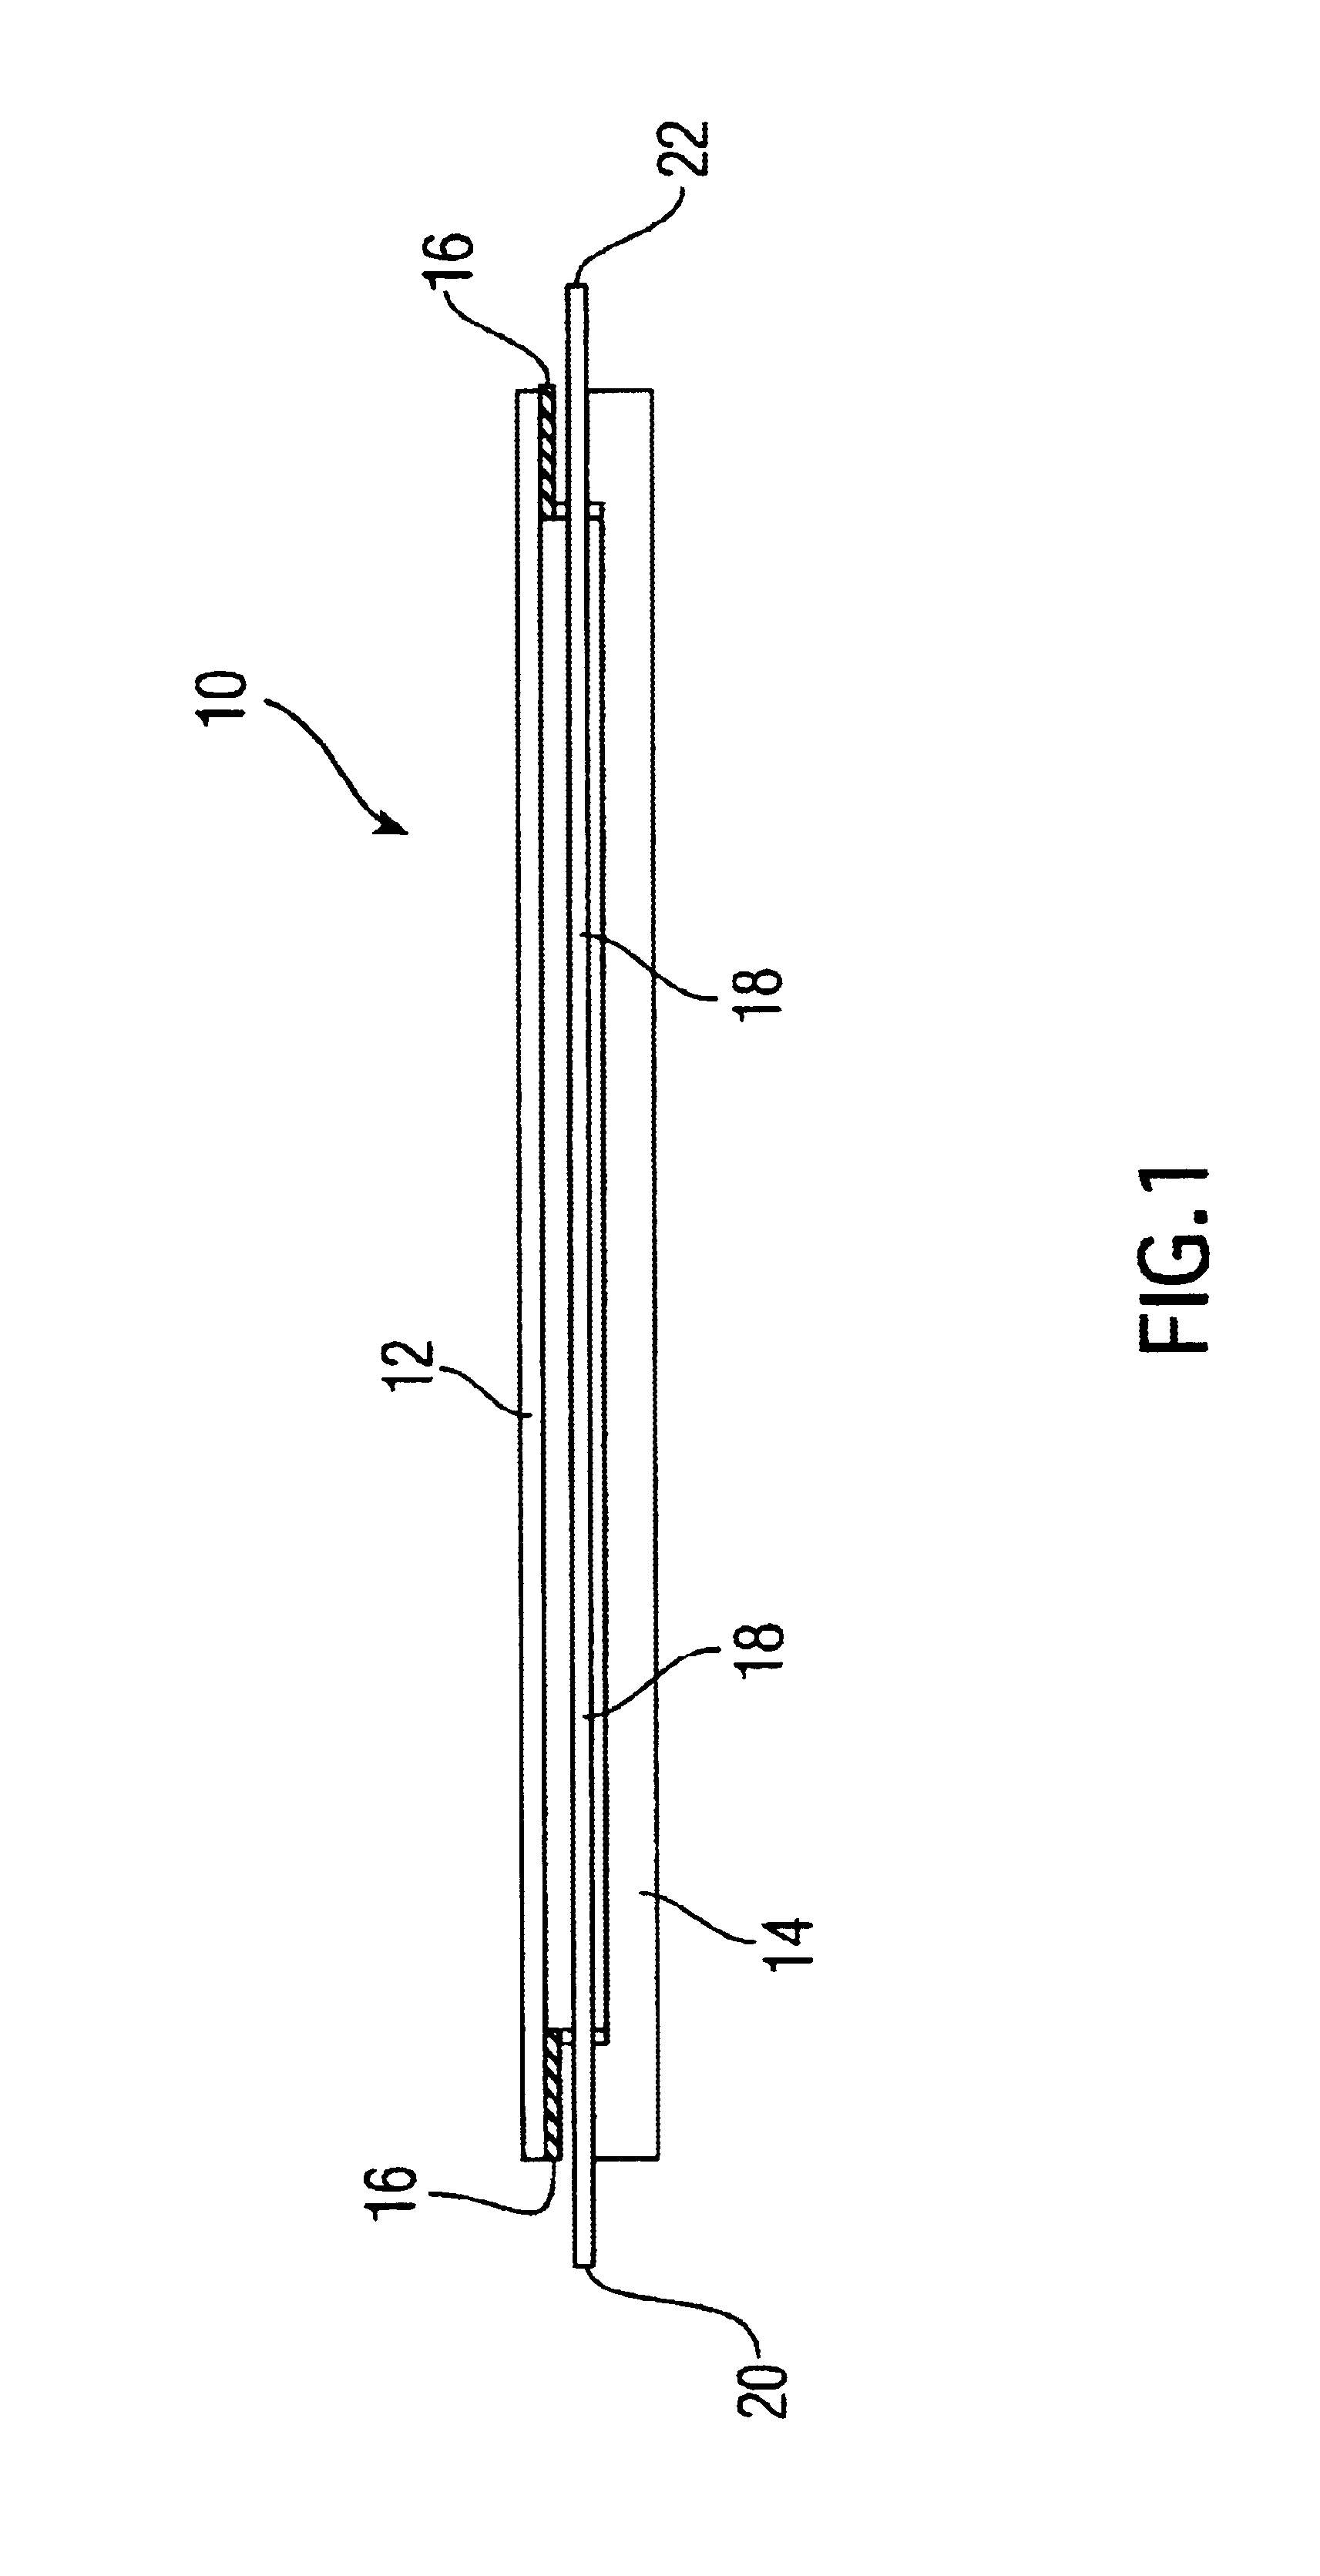 Method for fabricating cell-containing implants